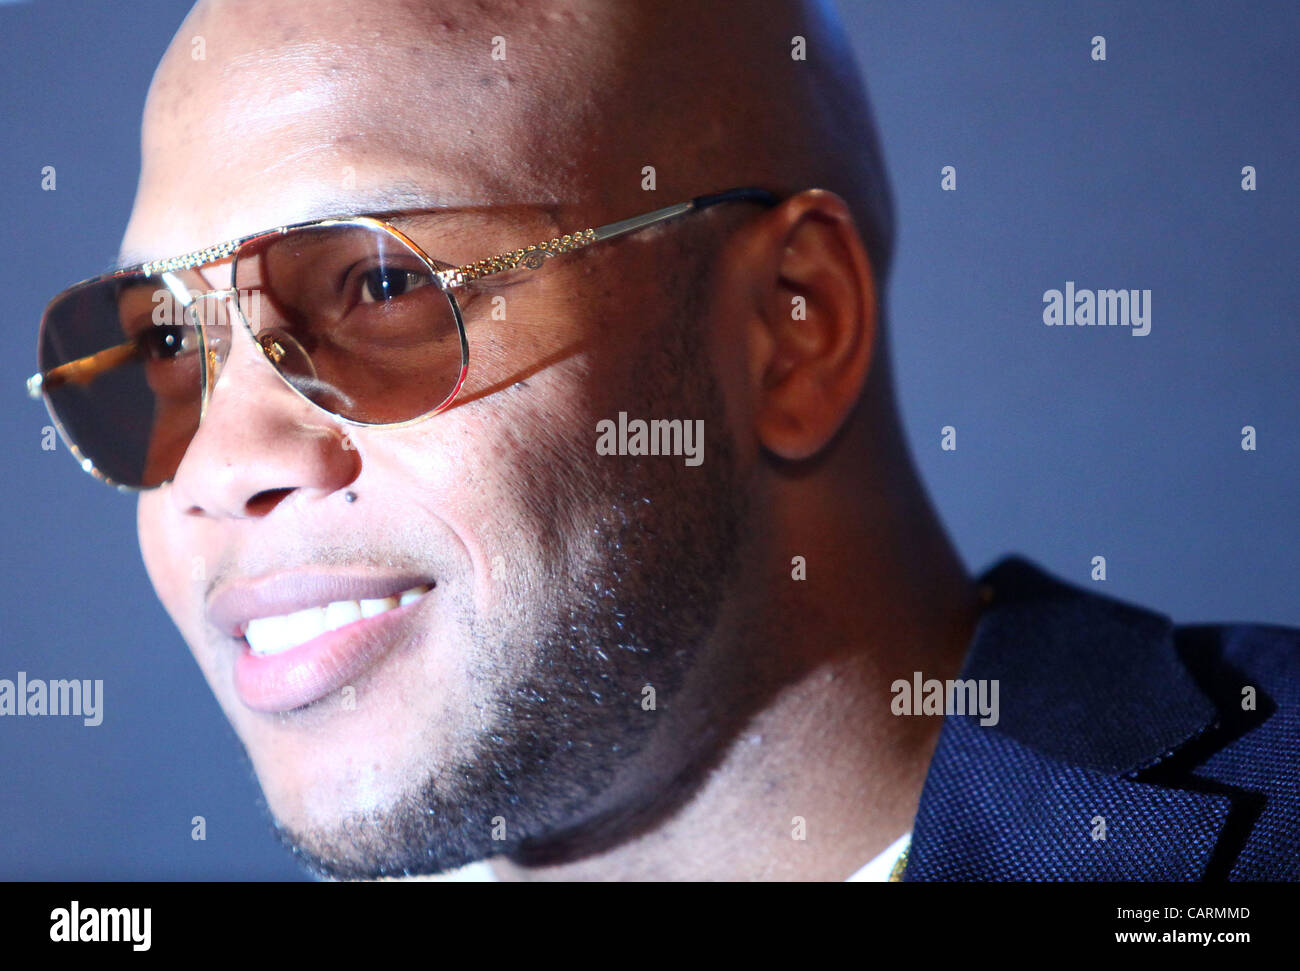 April 15, 2012 - Melbourne, NSW, Australia - Rapper FLO RIDA arrives at the 2012 TV Week Logie Awards in Melbourne at the Crown Casino. (Credit Image: © Marianna Massey/ZUMAPRESS.com) Stock Photo